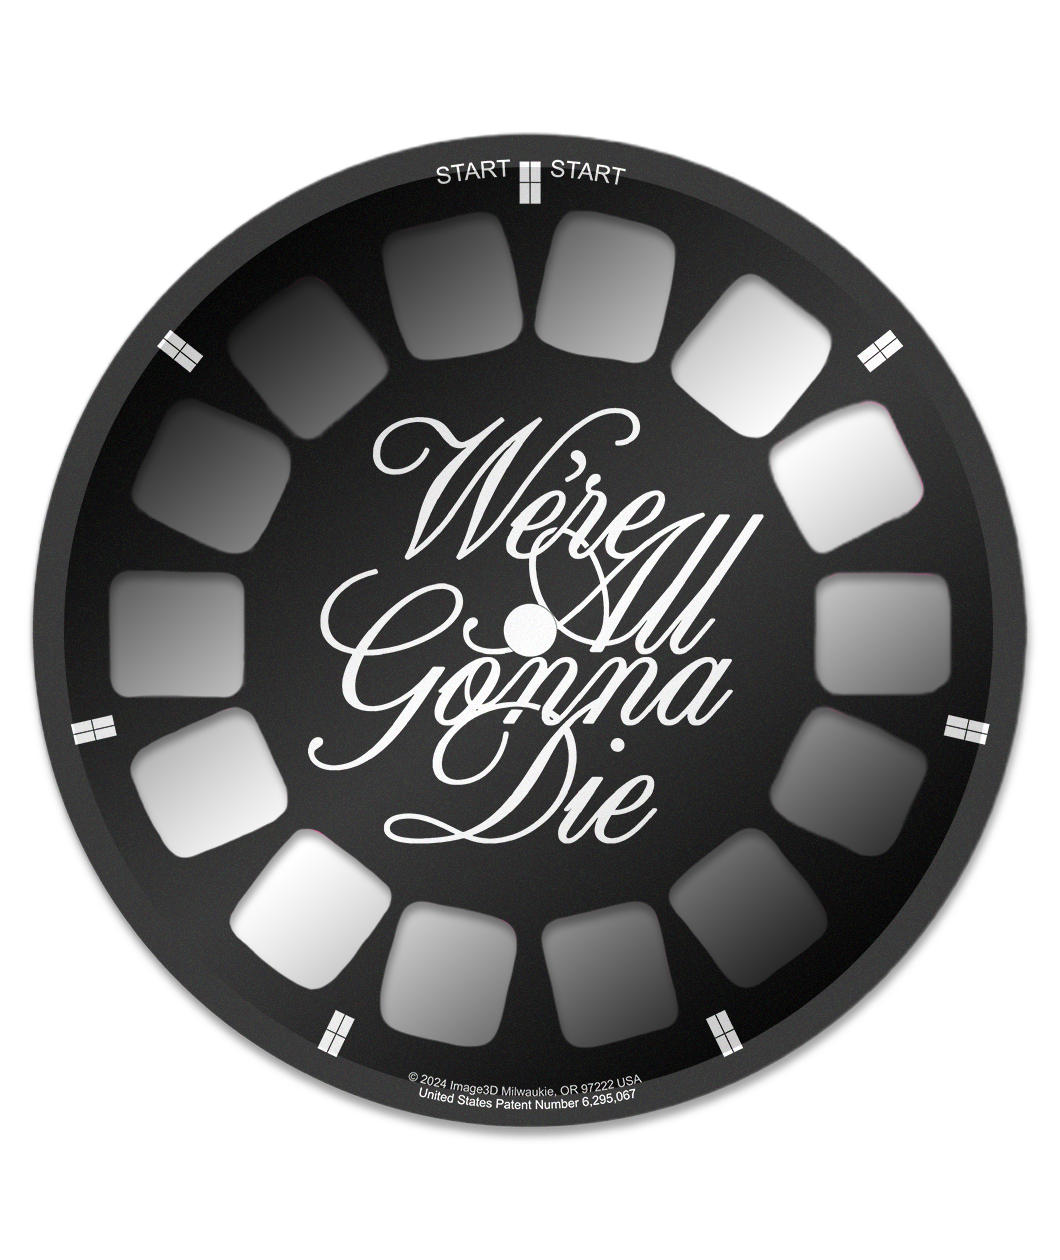 Reel for retroviewer with text, "We're all gonna die" on the front